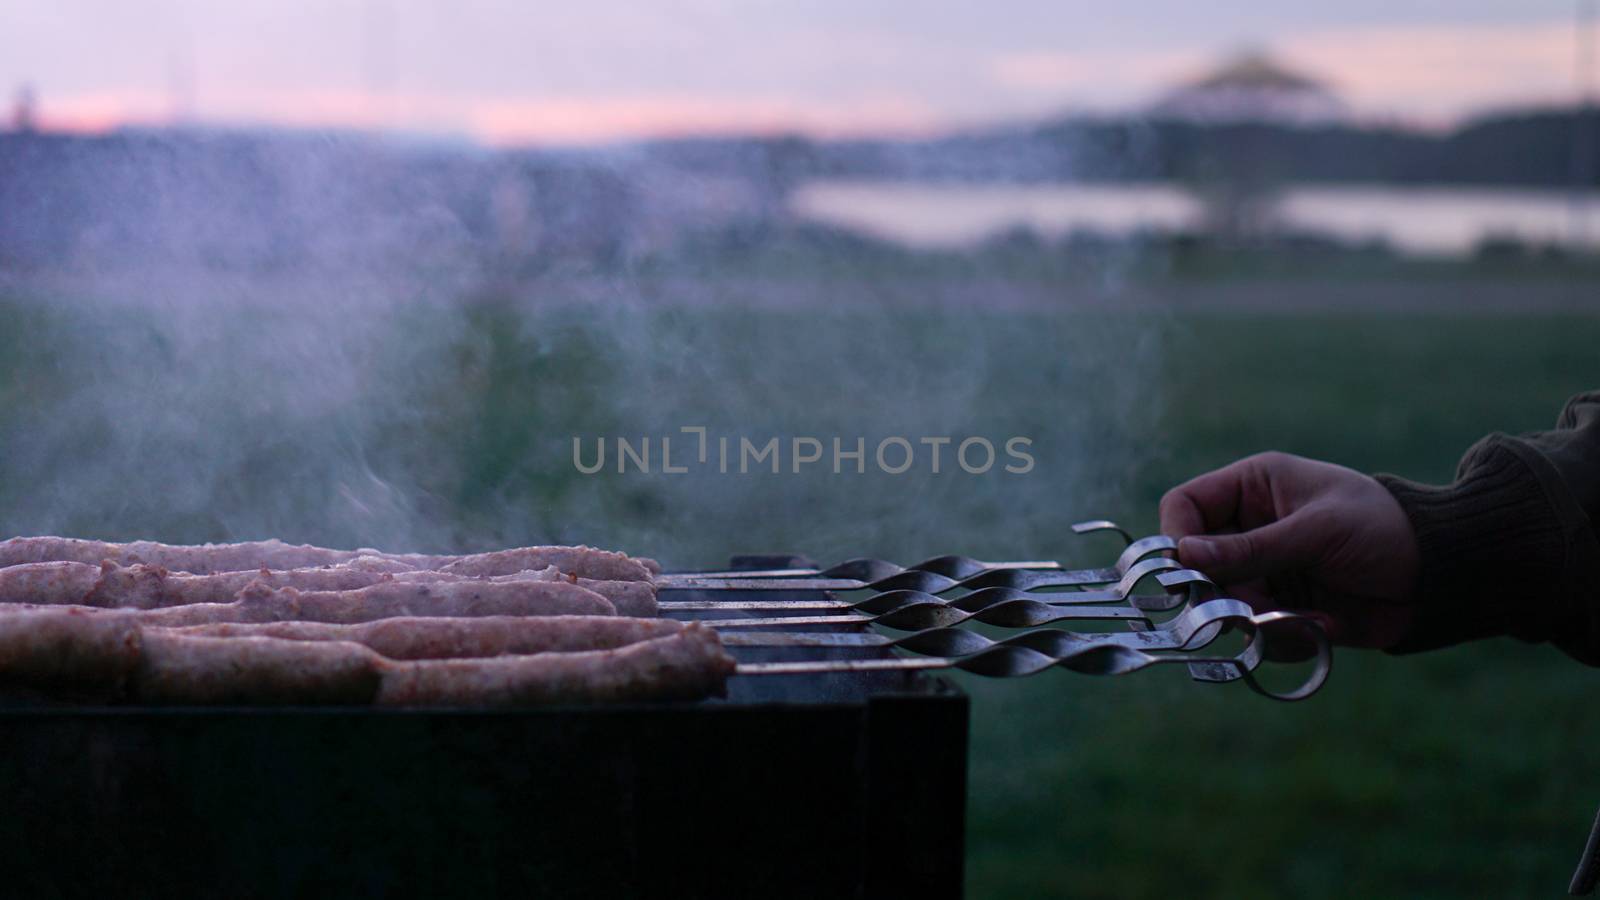 Grilling sausages at sunset outdoors gathering with friends and family by natali_brill